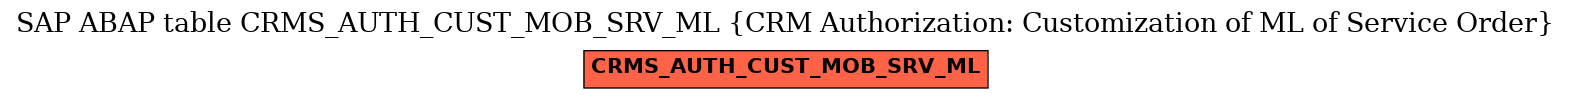 E-R Diagram for table CRMS_AUTH_CUST_MOB_SRV_ML (CRM Authorization: Customization of ML of Service Order)